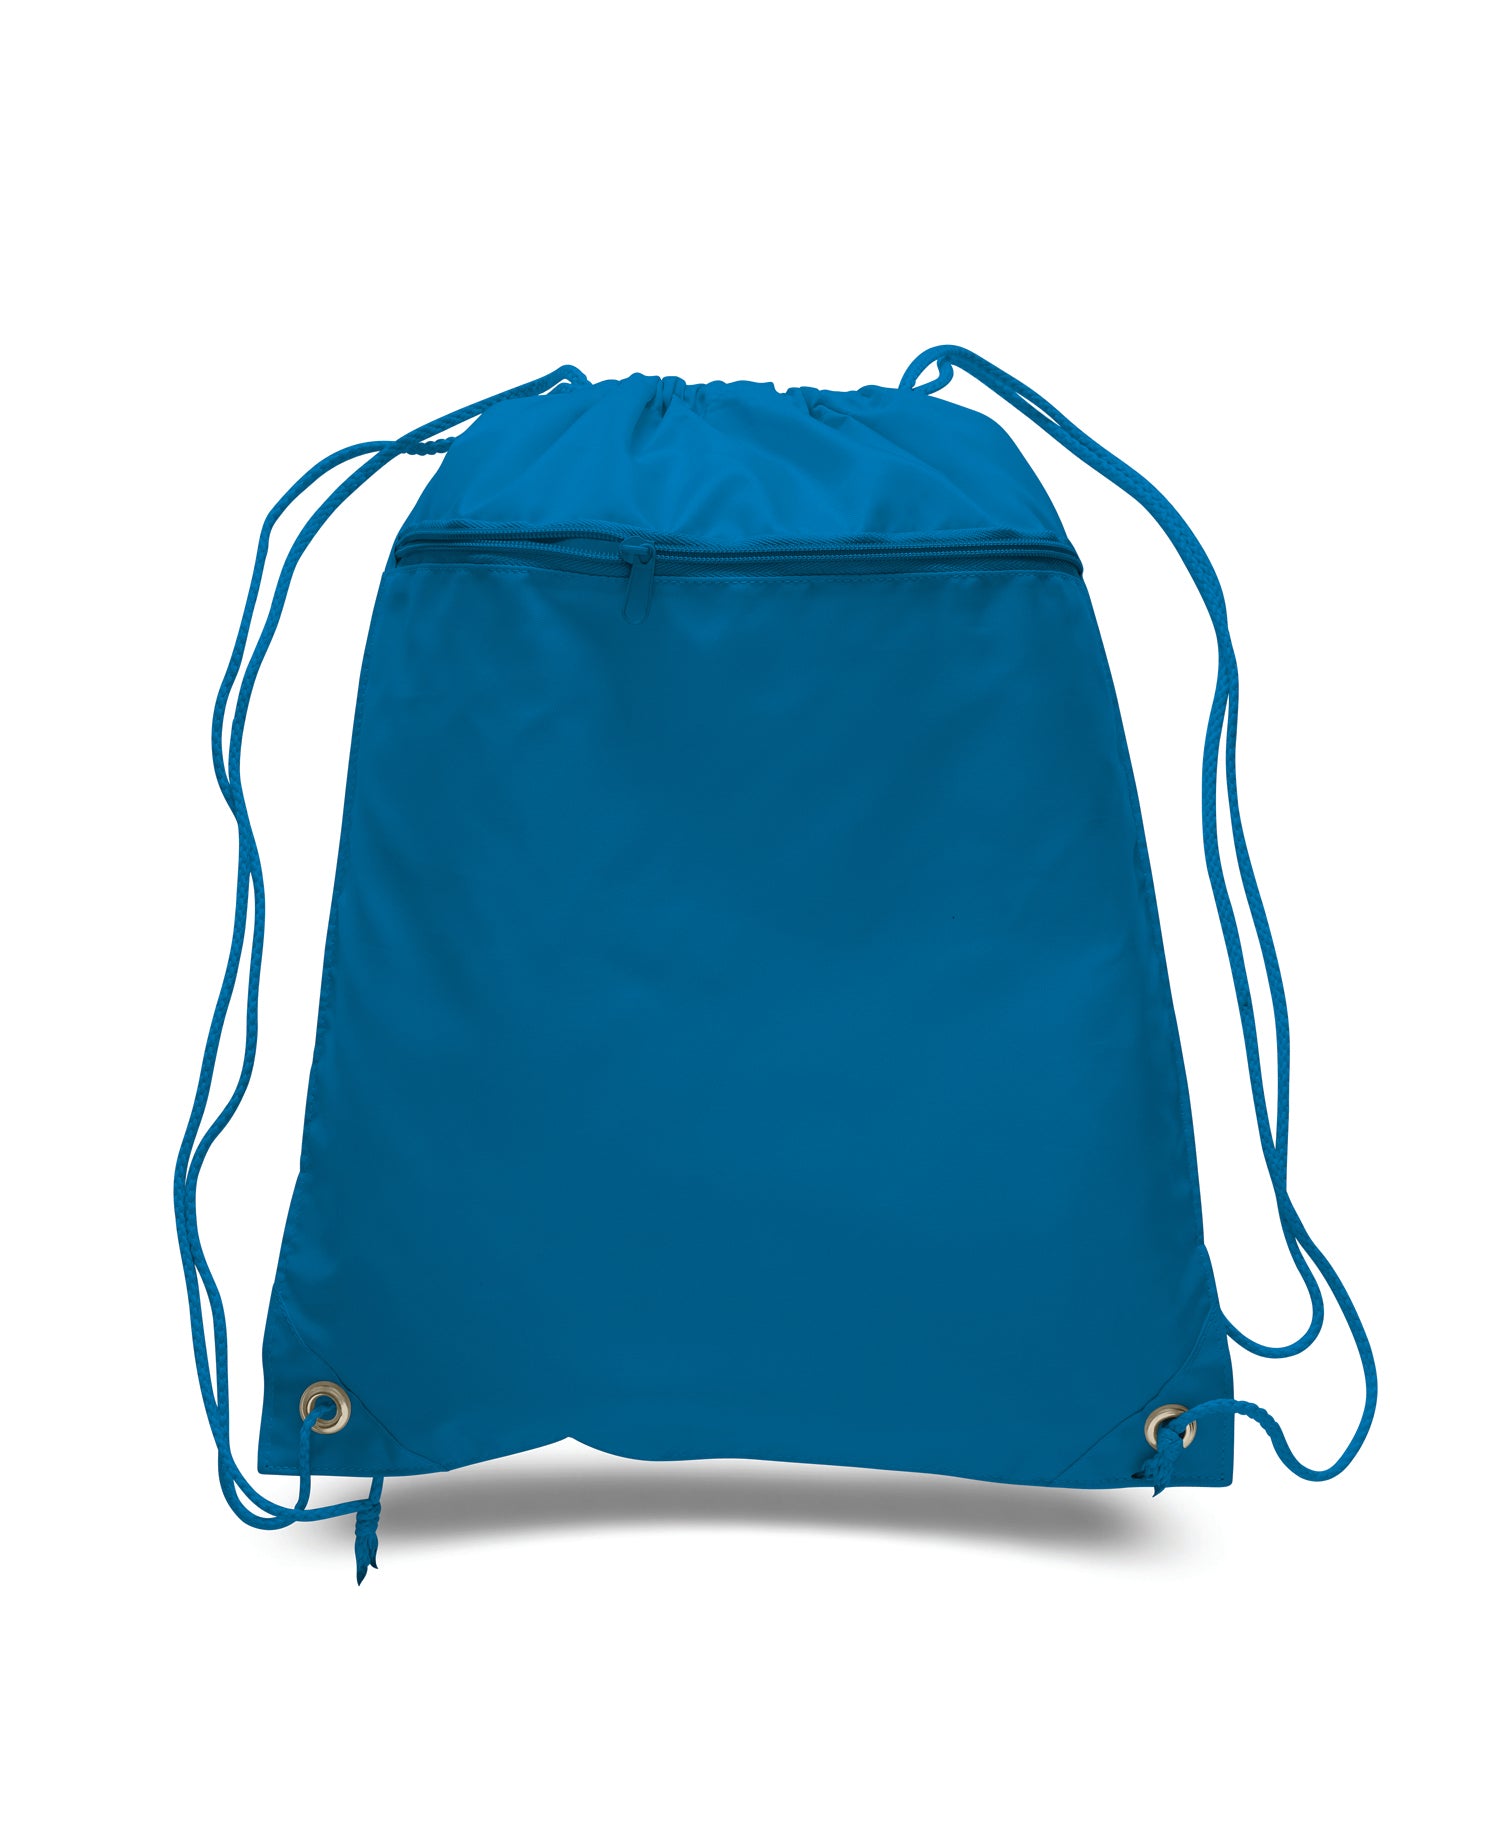 Constellation Polyester Drawstring Backpack  HP2 Inc - Promotional  products in Phoenix, Arizona United States